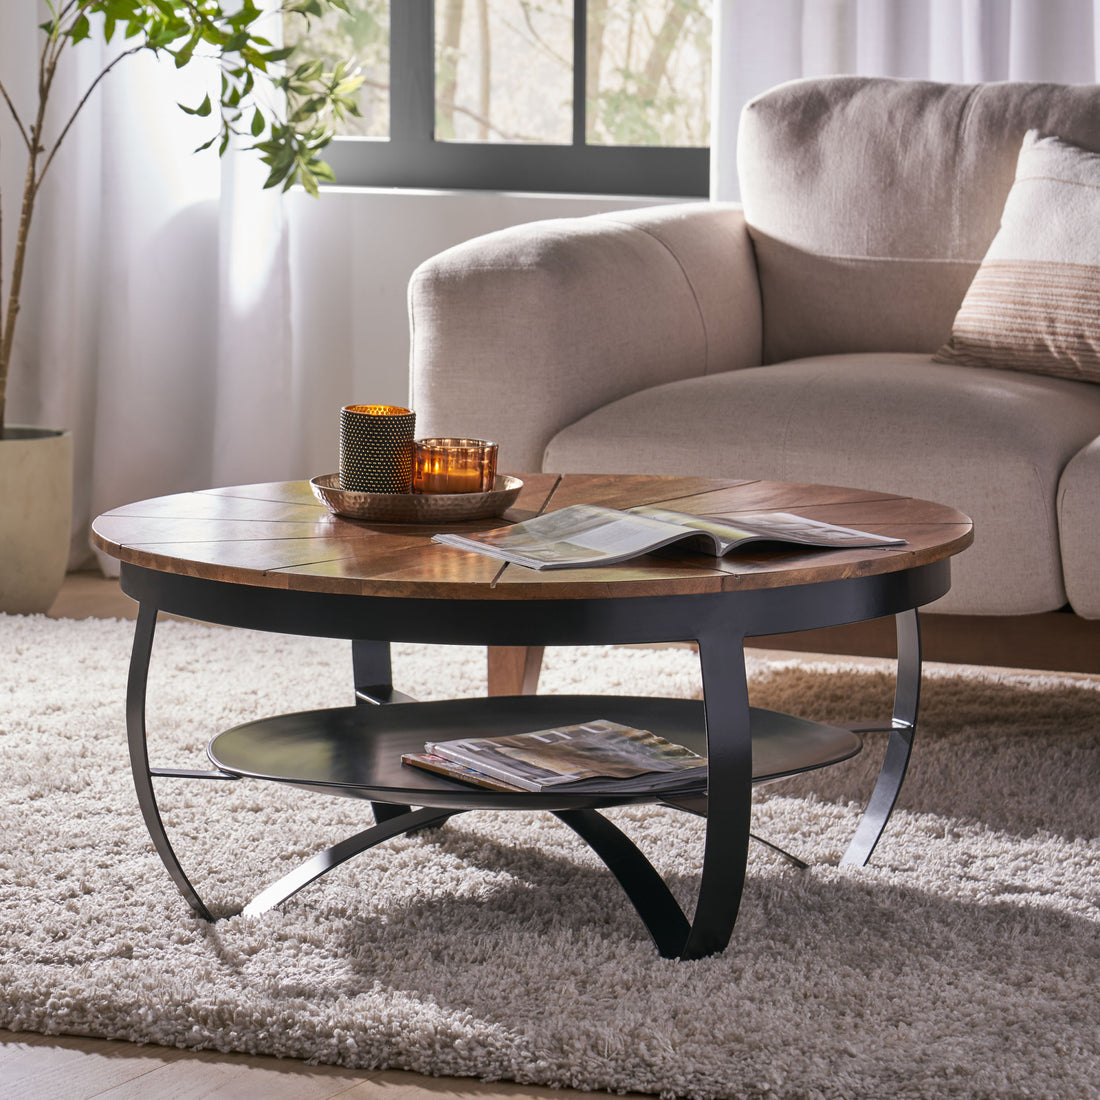 WOODEN & IRON COFFEE TABLE natural-metal & wood